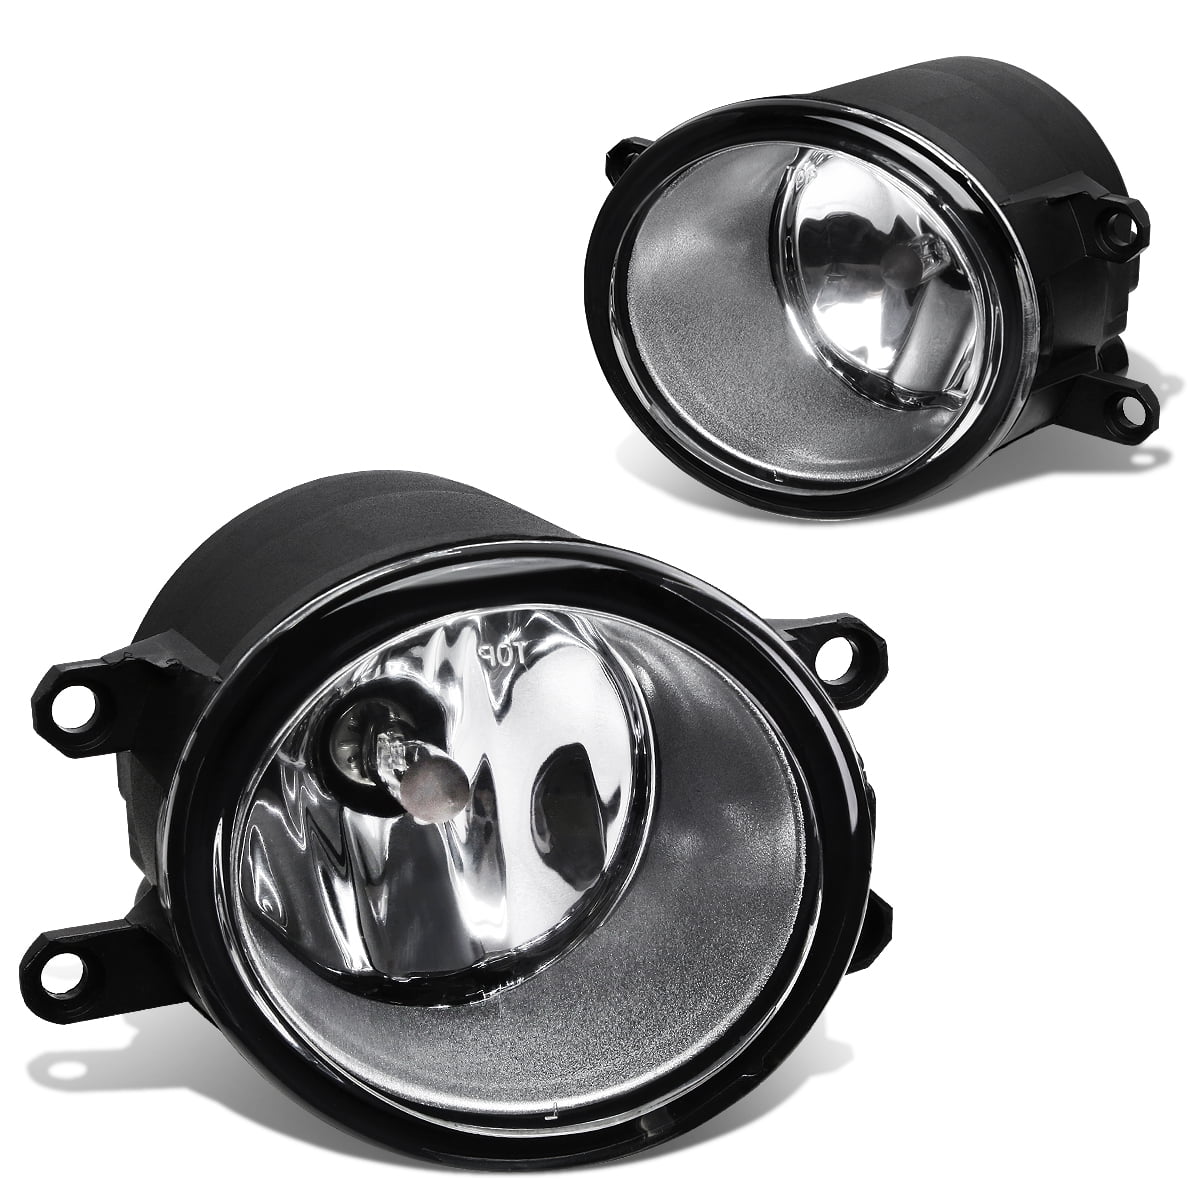 Fog Lights Compatible with 4Runner Avalon Camry Highlander Matrix Prius Rav4 Tacoma CT200h IS250 IS350 LX570 RX350 Fog Lamps with Clear Lens for Passenger and Driver Side 